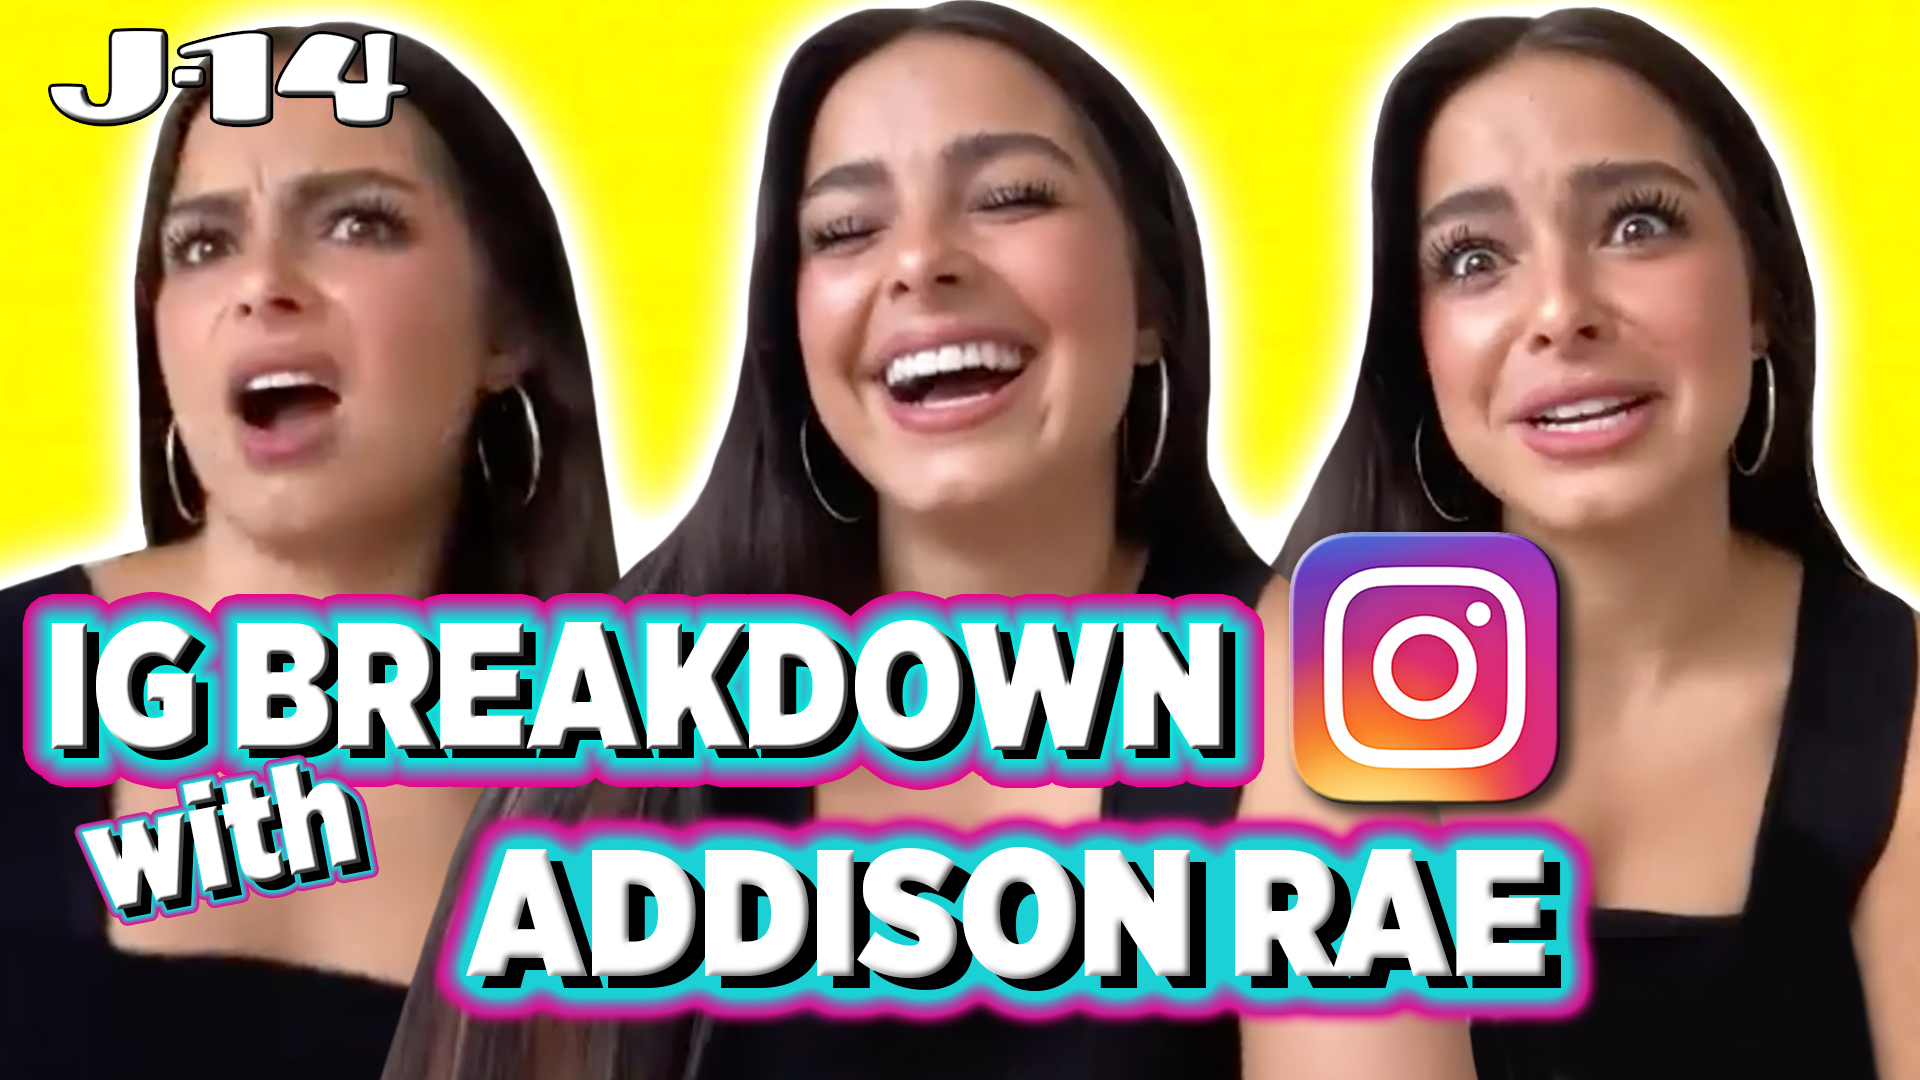 Addison Rae Breaks Down Instagram Posts Reacts To Her Old Pics